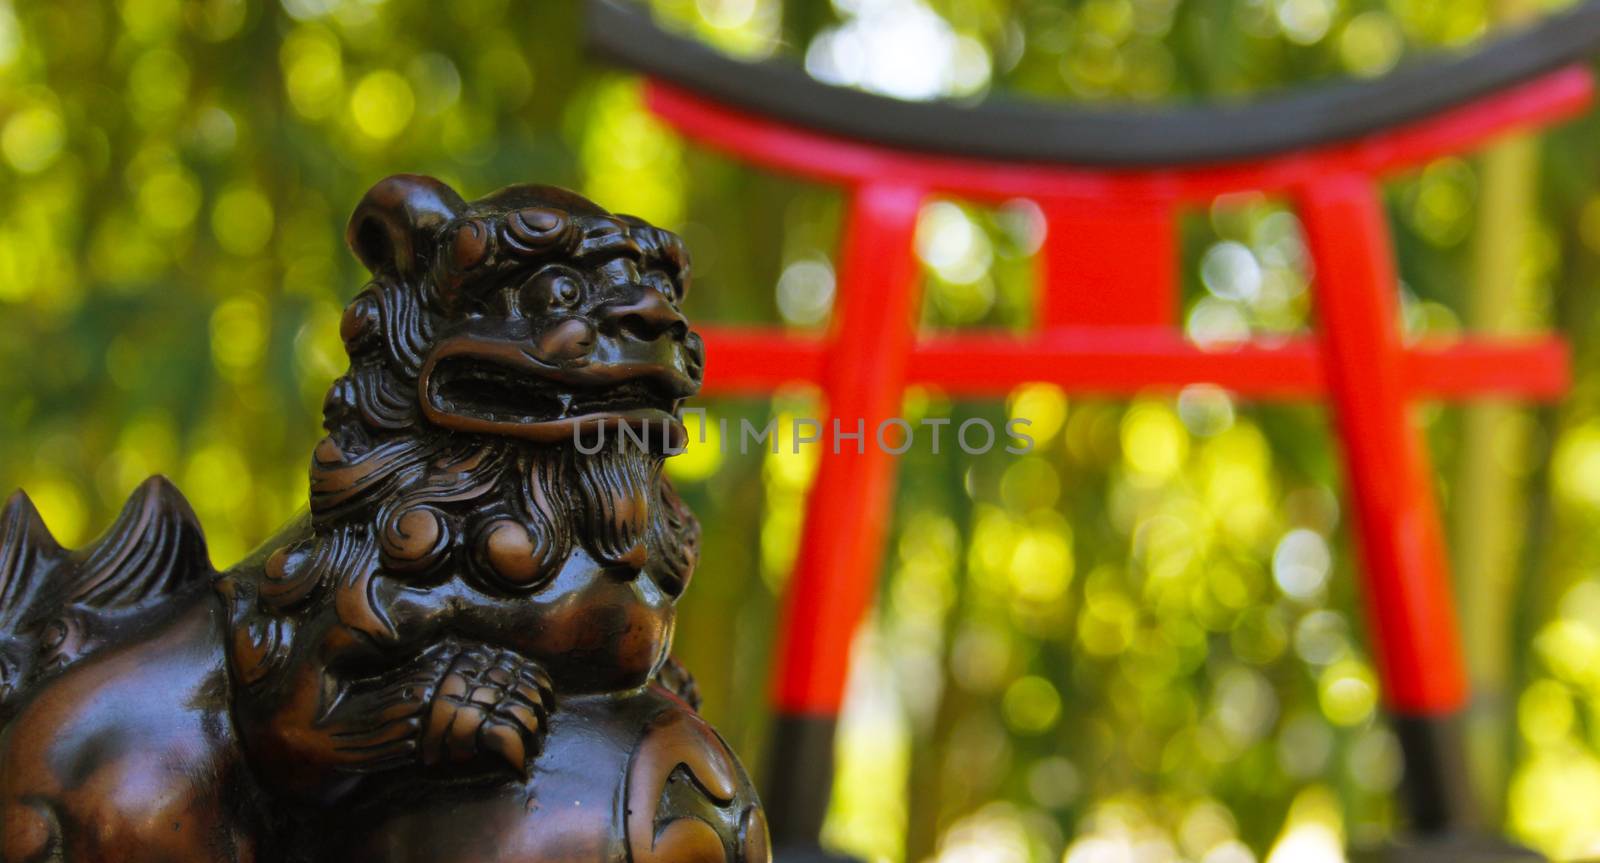 Torii Gate and Okinawan Statue by Marti157900